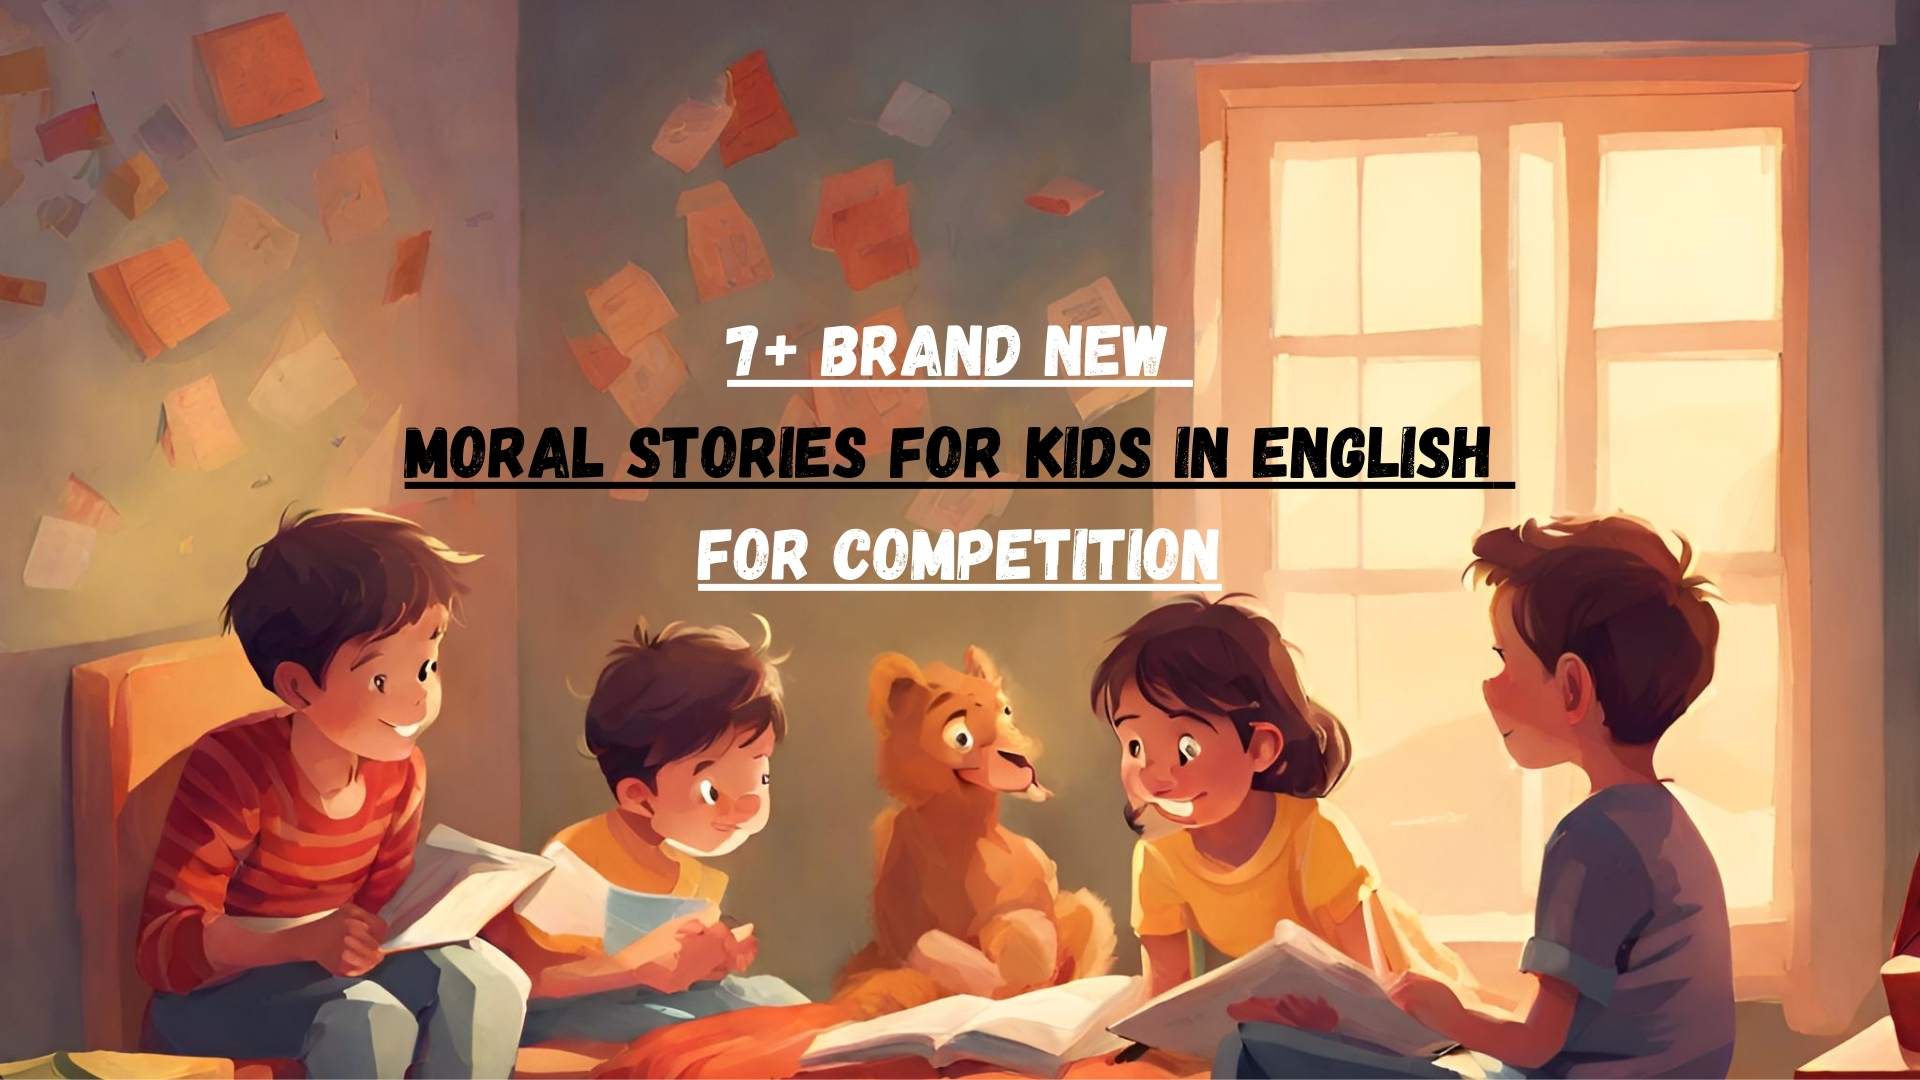 Moral Stories for Kids in English for Competition